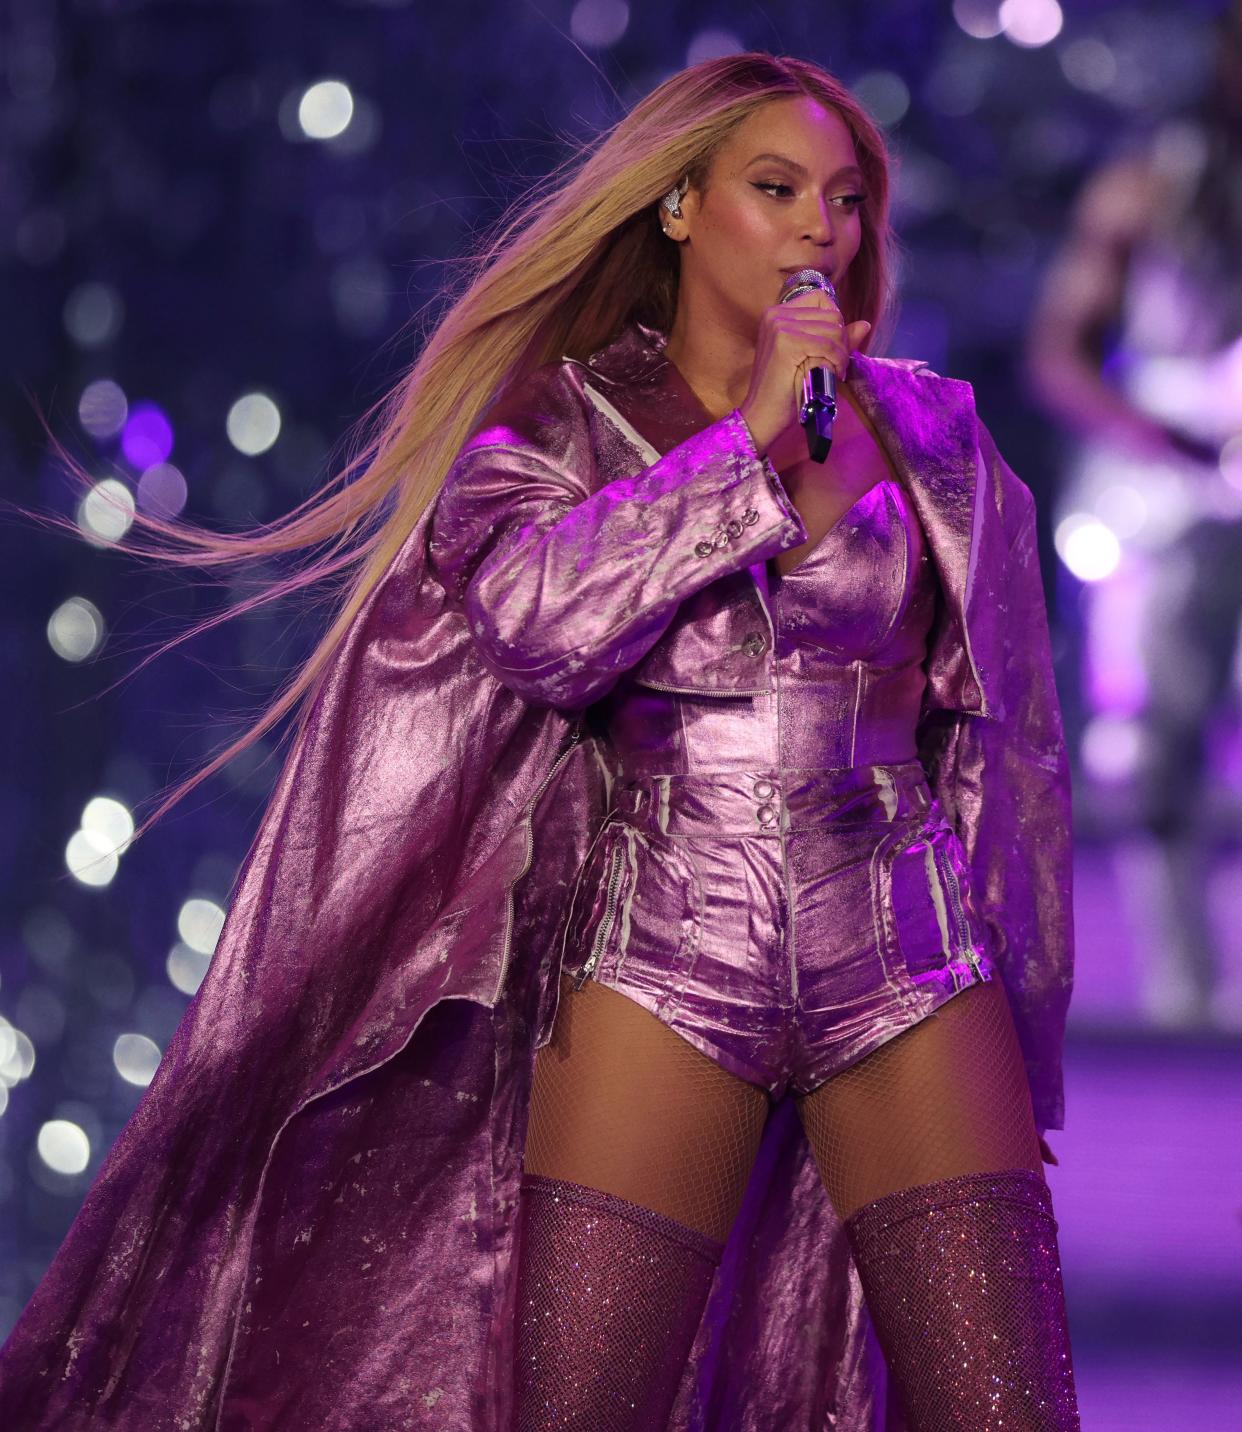 Beyoncé performs onstage at Huntington Bank Stadium in Minneapolis on July 20 on her Renaissance World Tour. "Renaissance: A Film by Beyoncé," a behind-the-scenes look at the tour, opens in theaters Dec. 1.